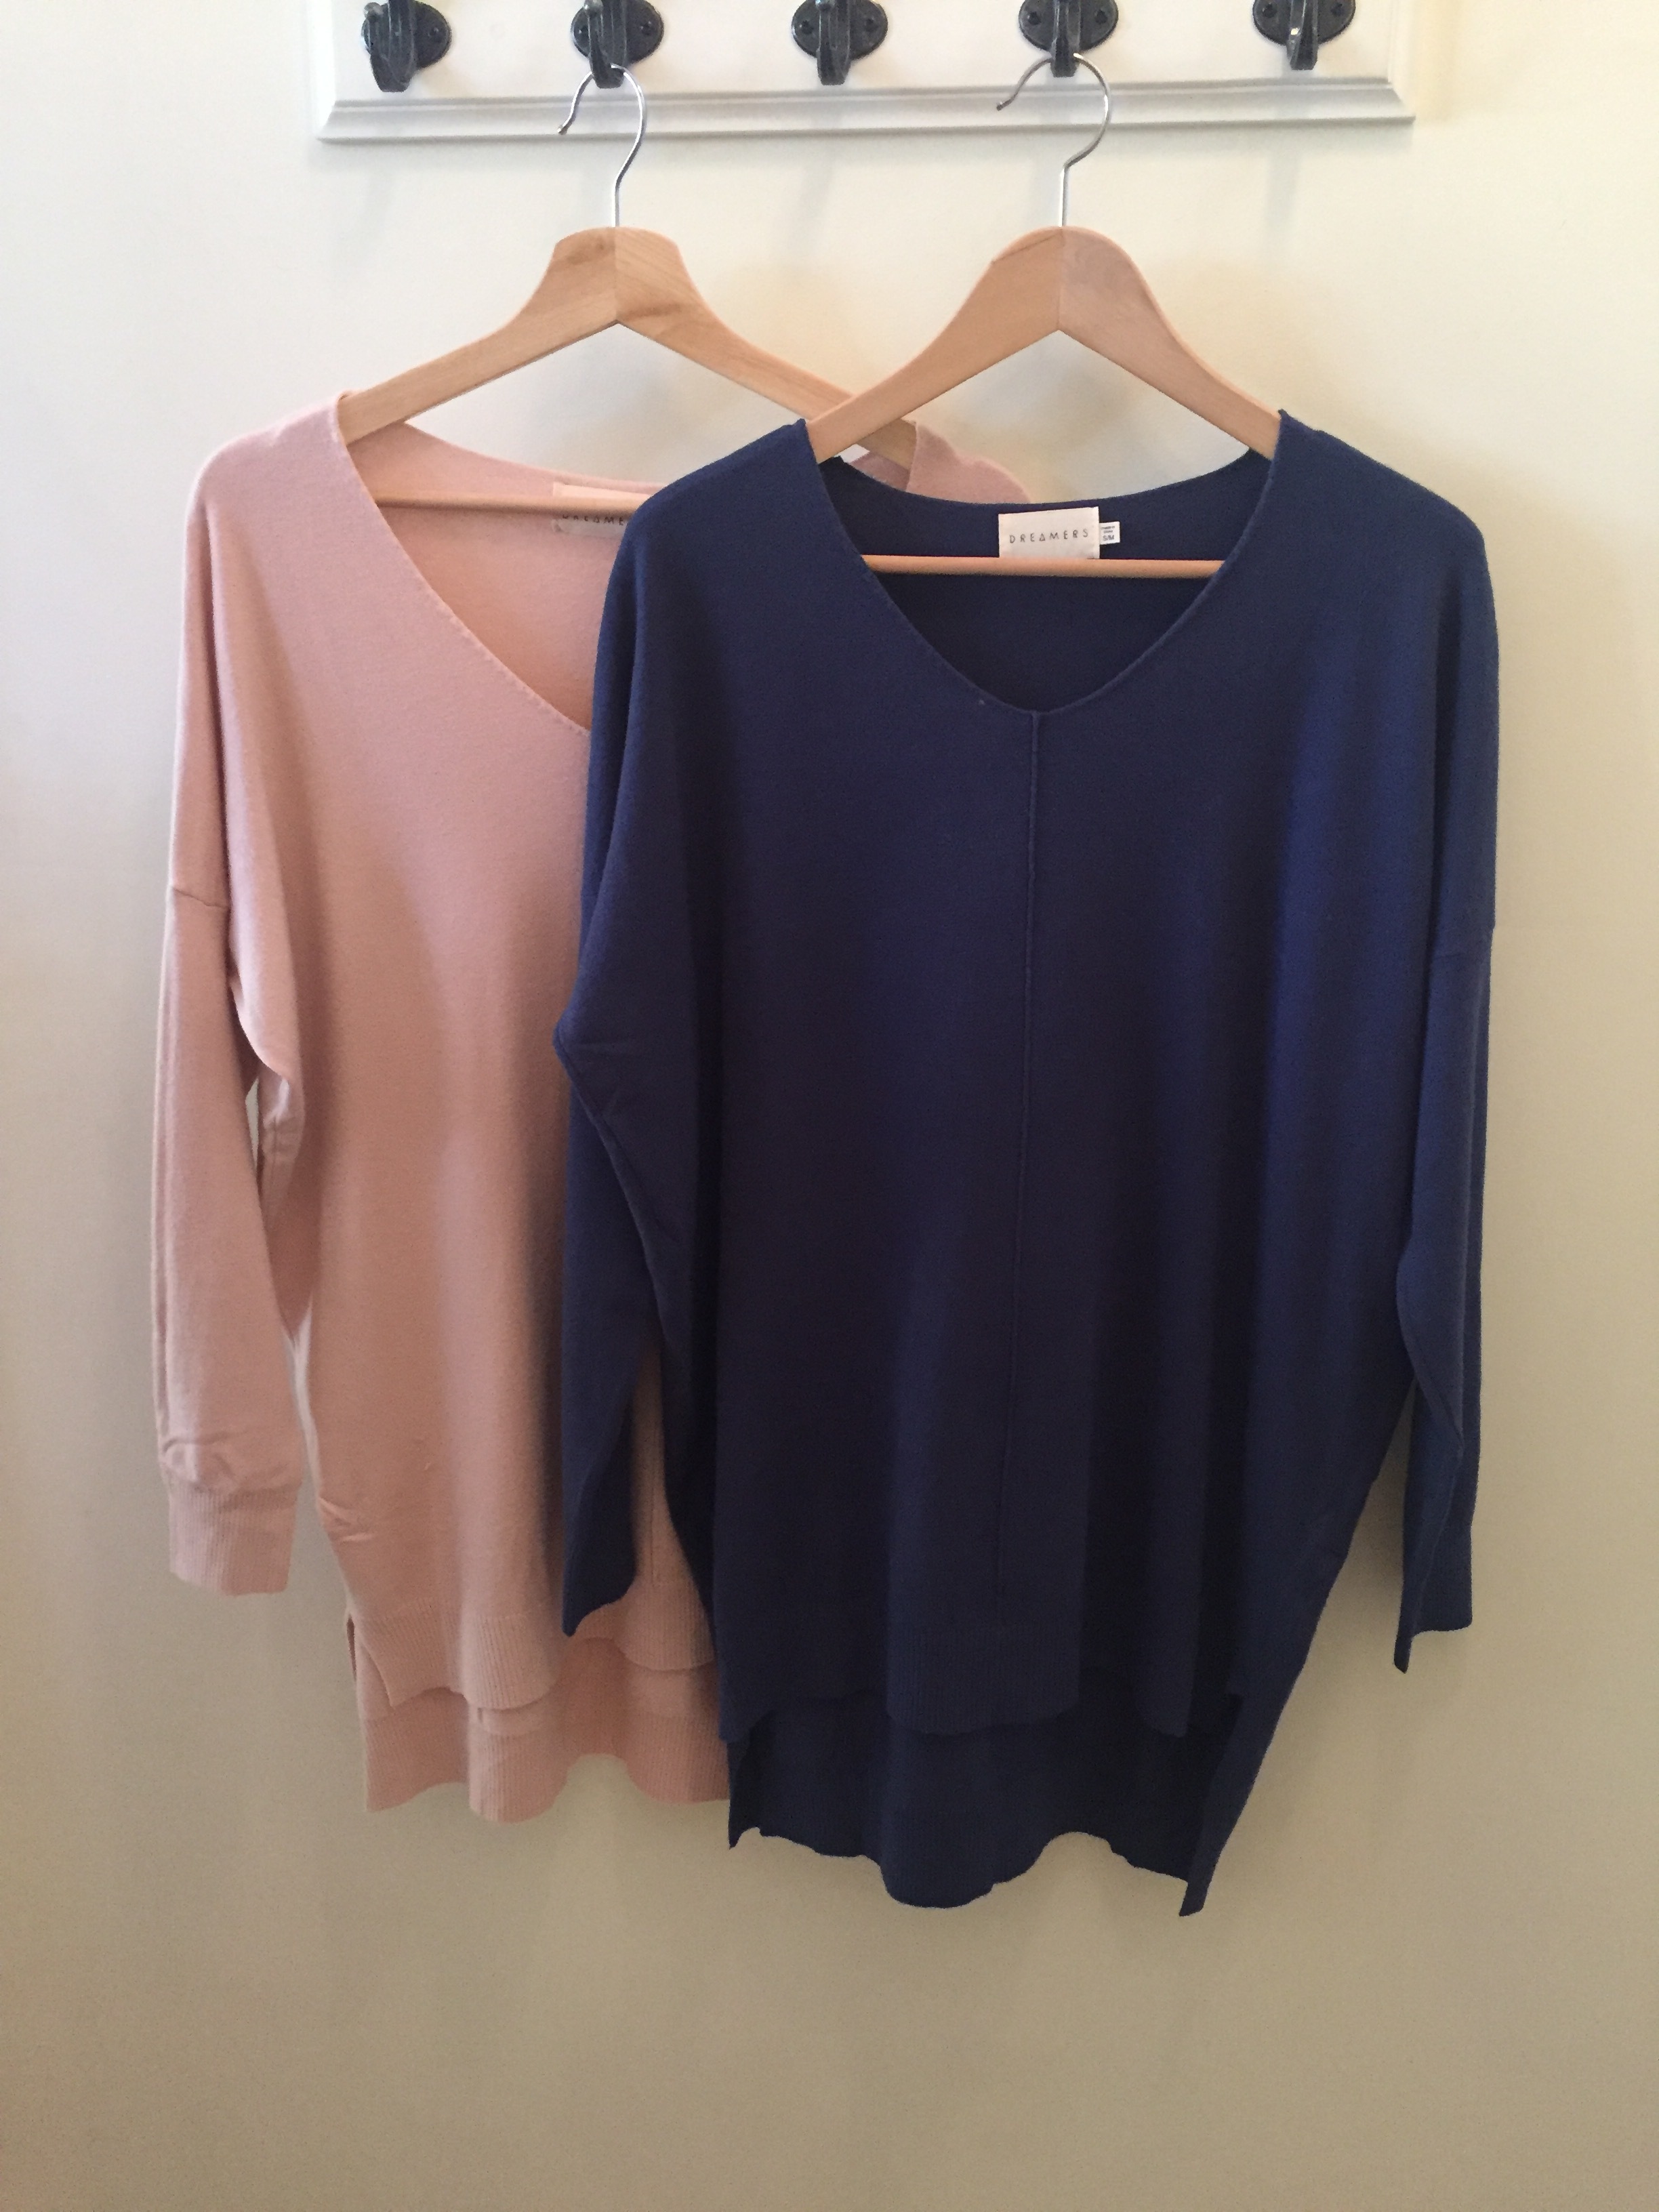 Dreamers V-Neck Sweaters, $42